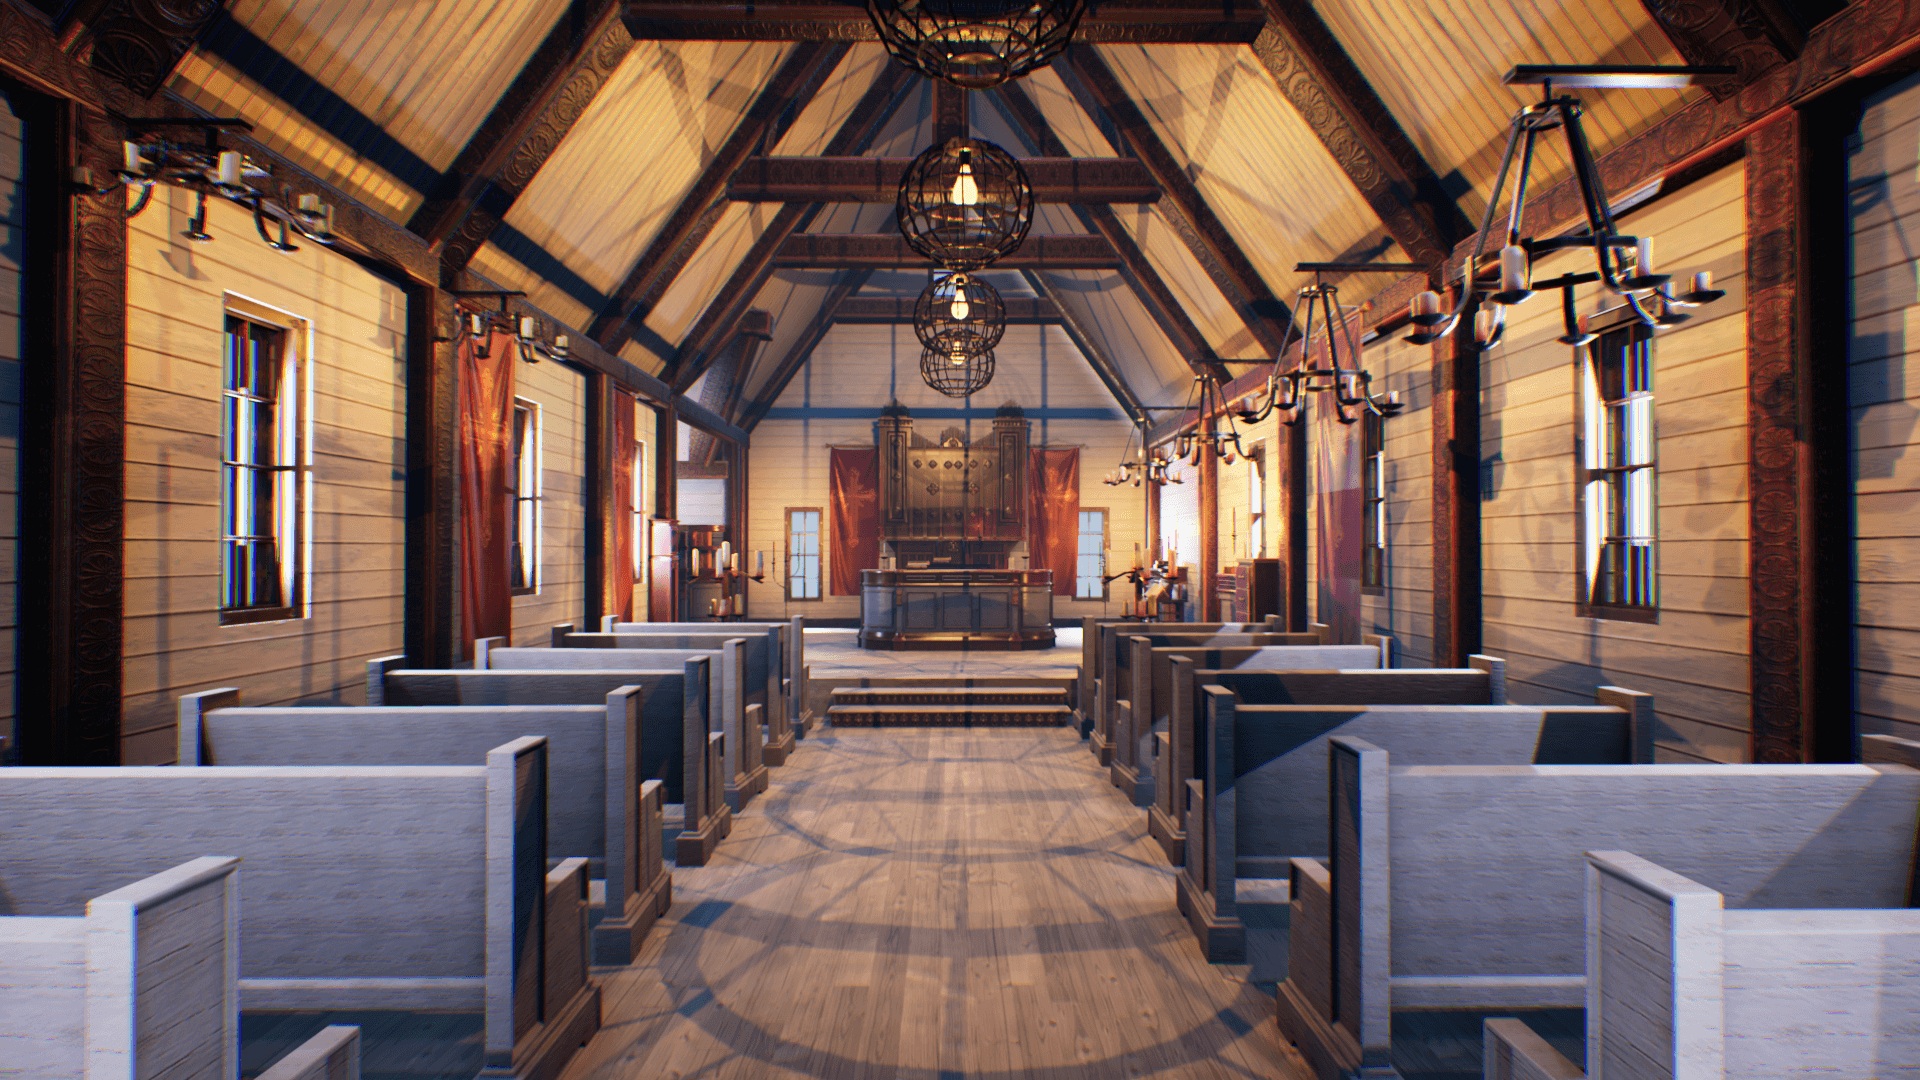 An image showing Church 4. asset pack, created with Unreal Engine.